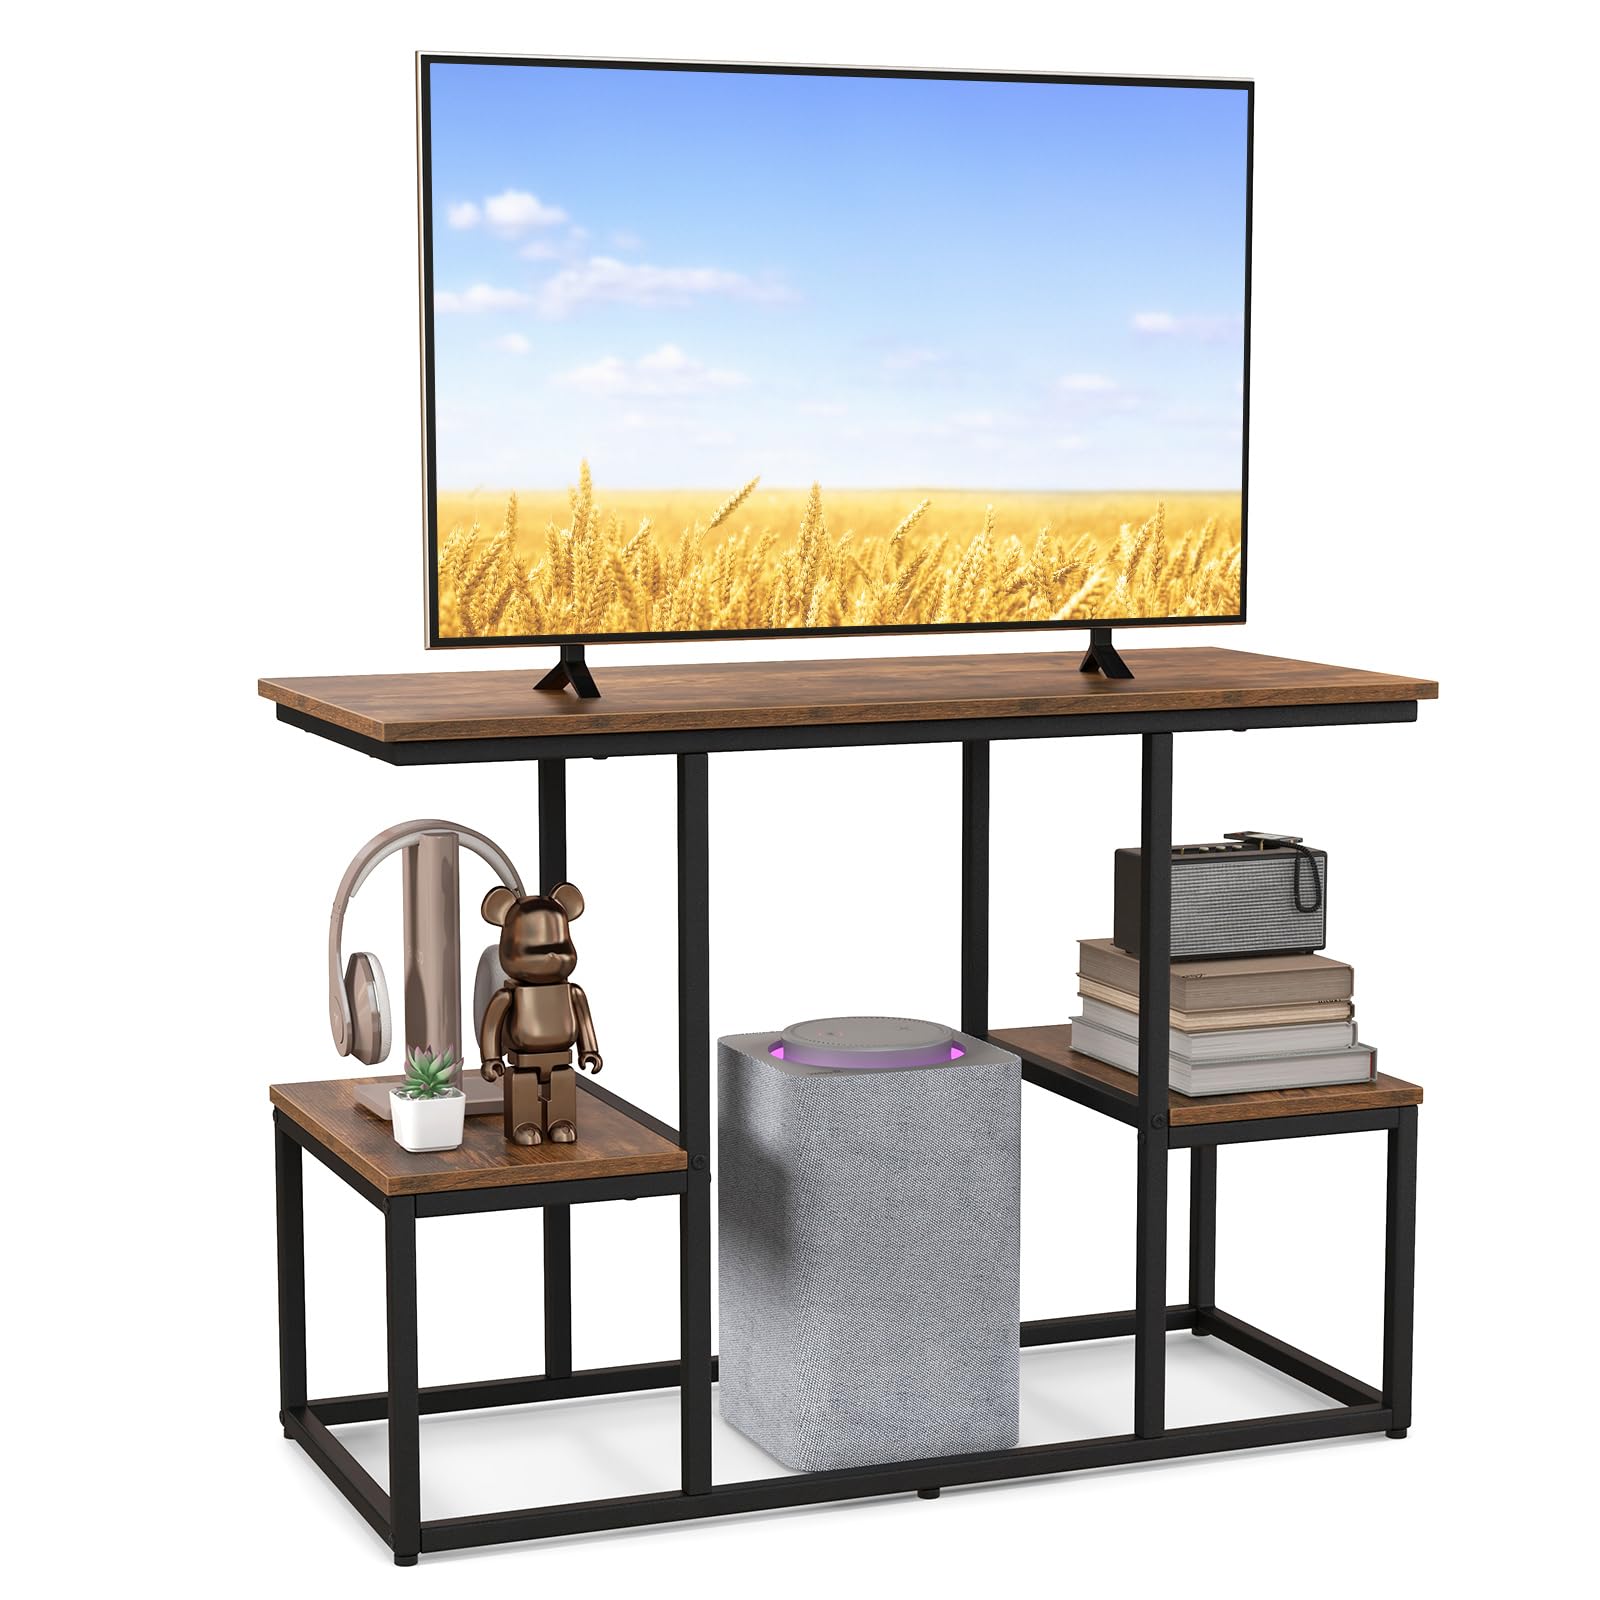 Giantex TV Stand for 50-Inches TVs - Industrial Sofa Table with Open Storage Shelves, 2-Tier Display Rack